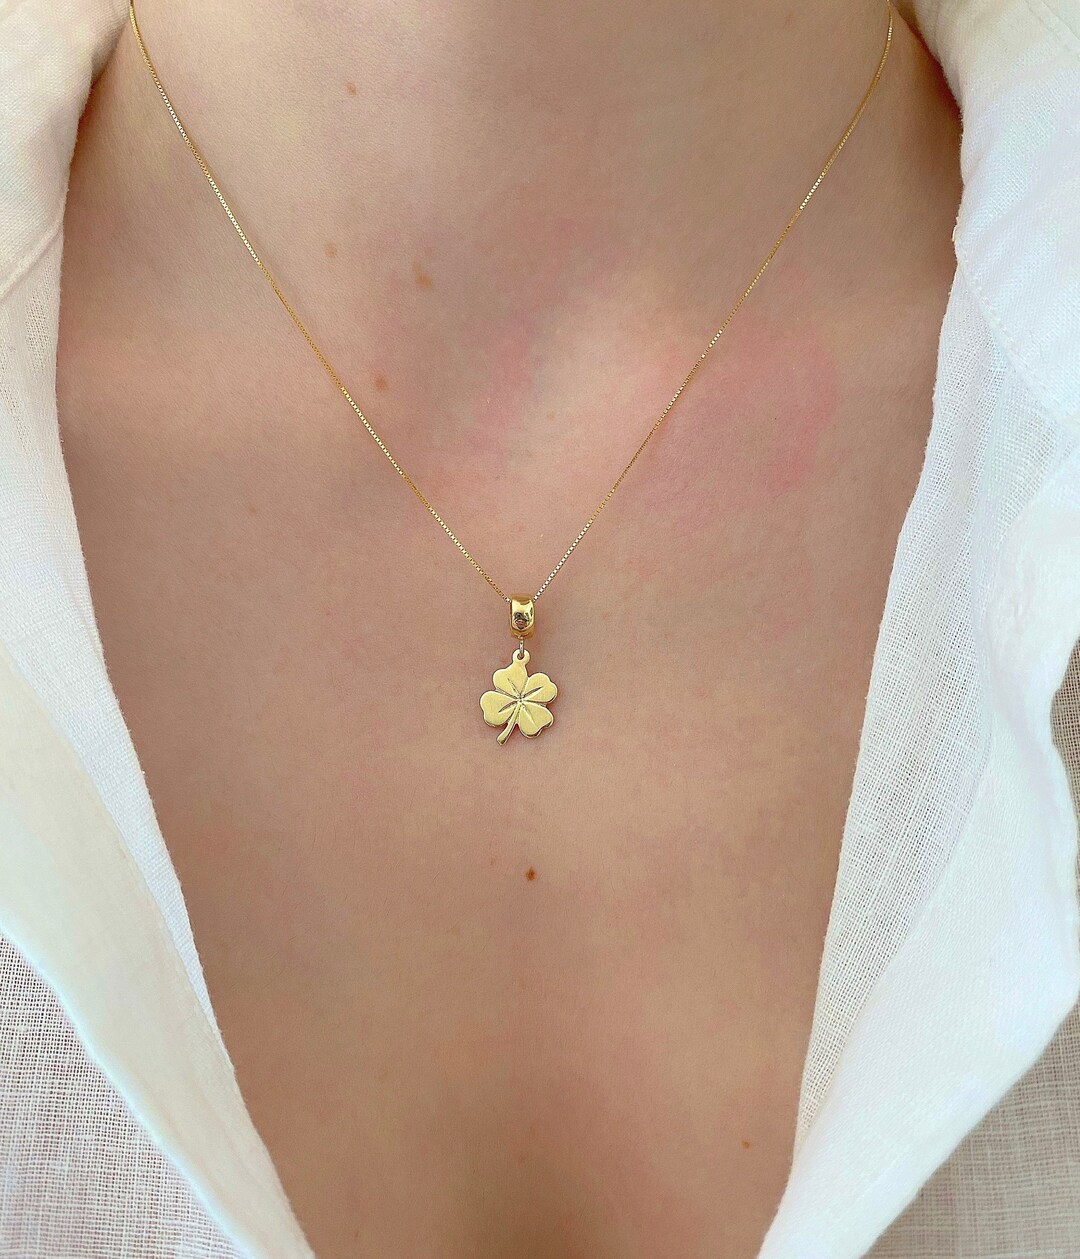 18kt Solid Gold Small 3 Clover Pendant Ladies Necklace 16 Yellow